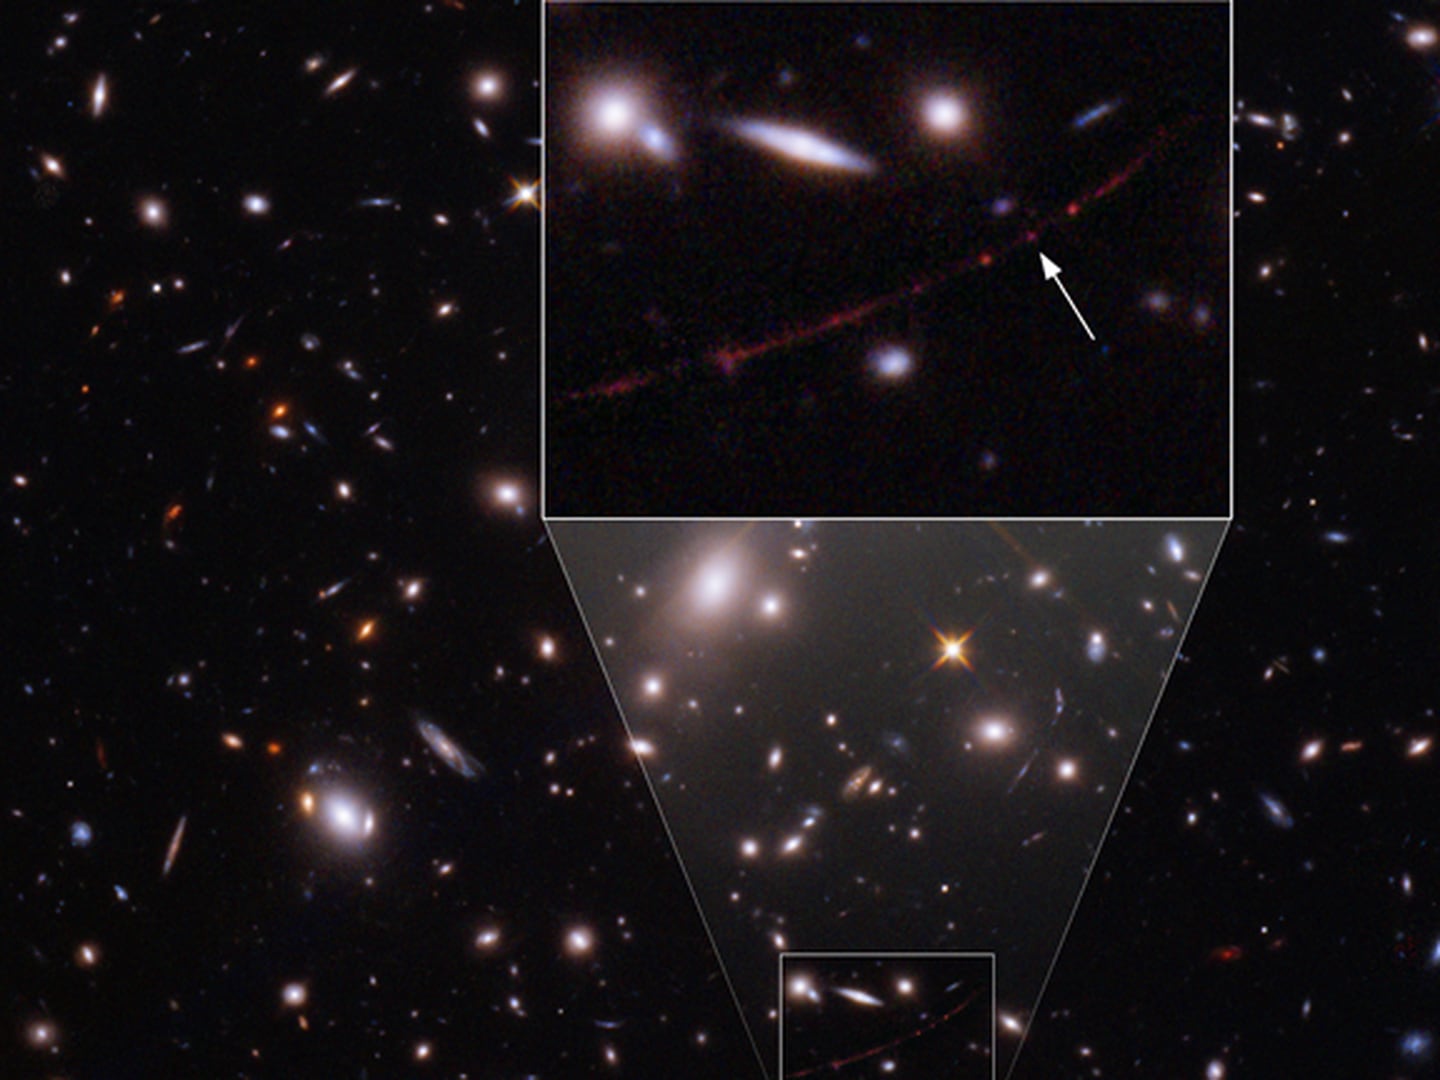 The Hubble Space Telescope shows: This is what the farthest star from Earth looks like so far!